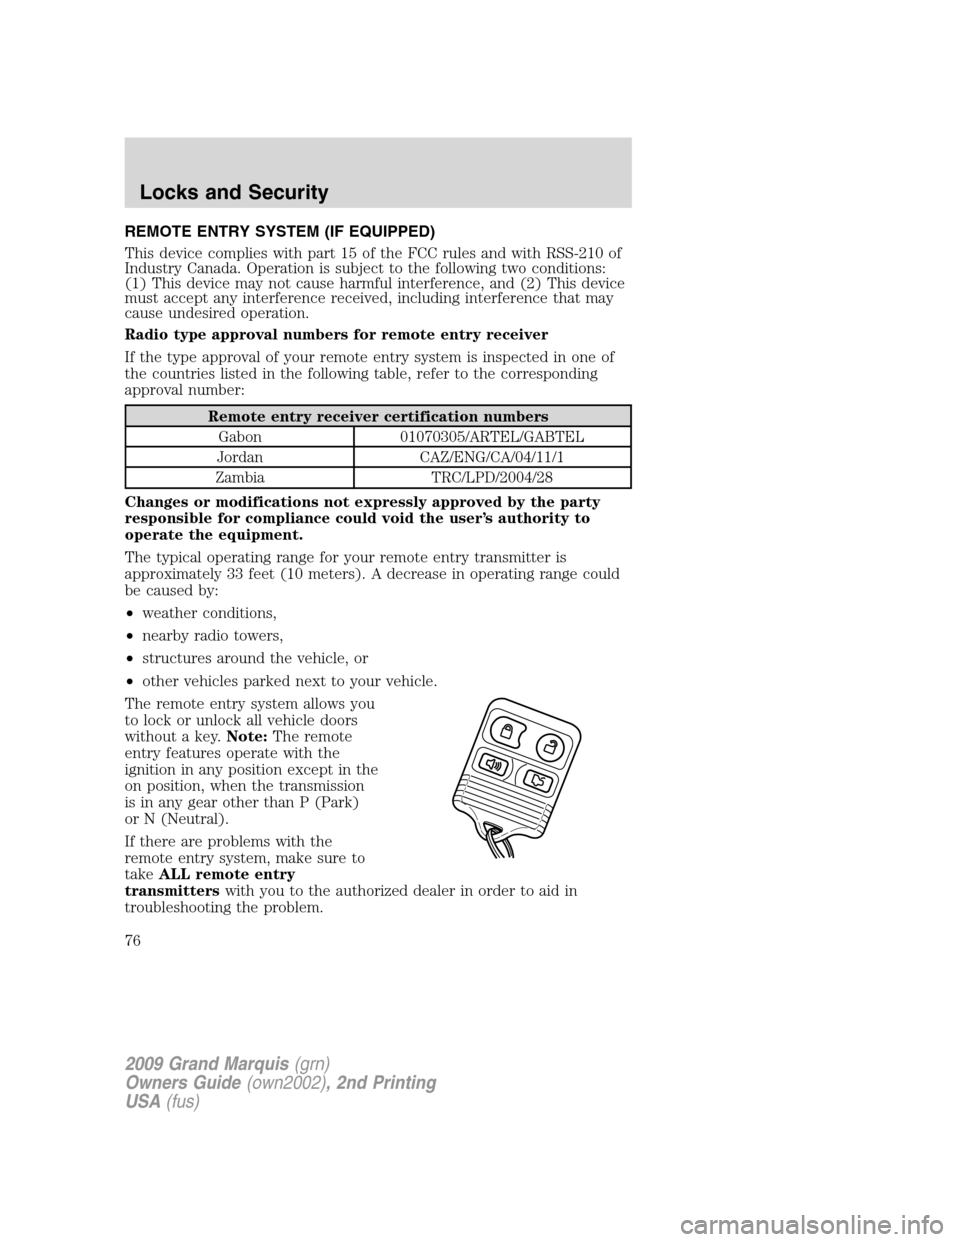 Mercury Grand Marquis 2009  Owners Manuals REMOTE ENTRY SYSTEM (IF EQUIPPED)
This device complies with part 15 of the FCC rules and with RSS-210 of
Industry Canada. Operation is subject to the following two conditions:
(1) This device may not 